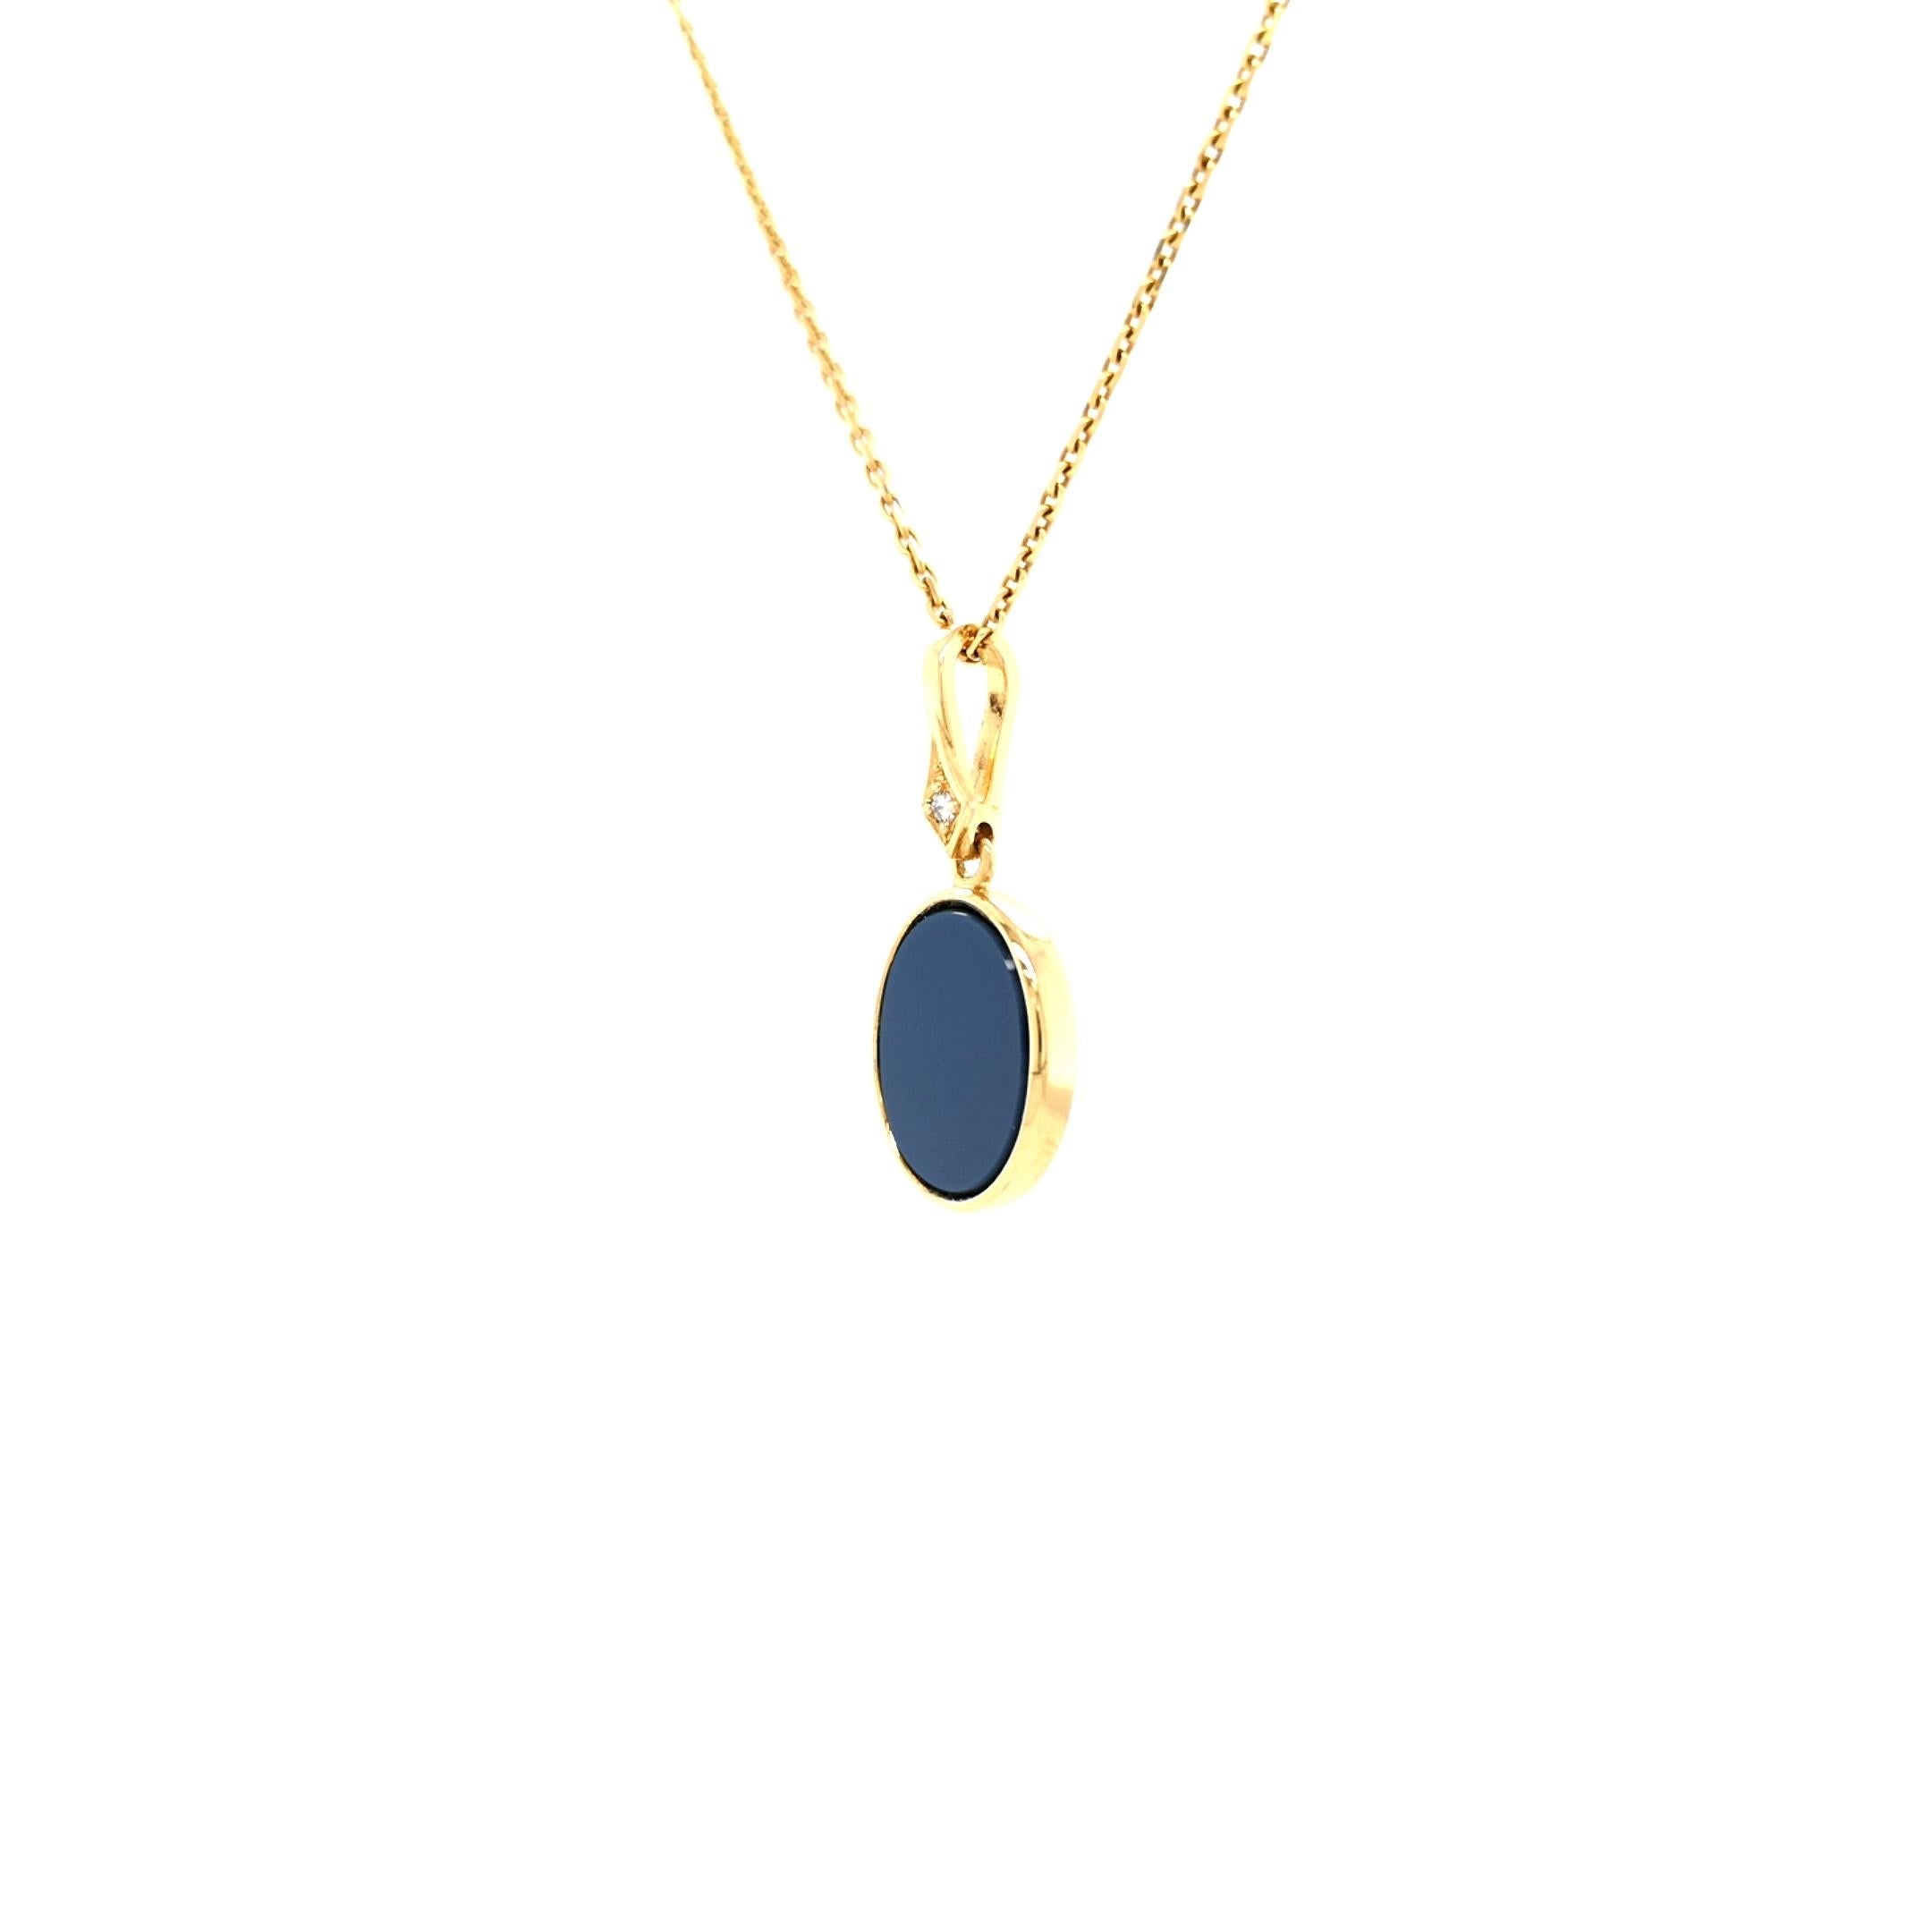 Oval Pendant Necklace 18k Yellow Gold 1 Diamond 0.02 ct G VS Blue Layered Onyx For Sale 2